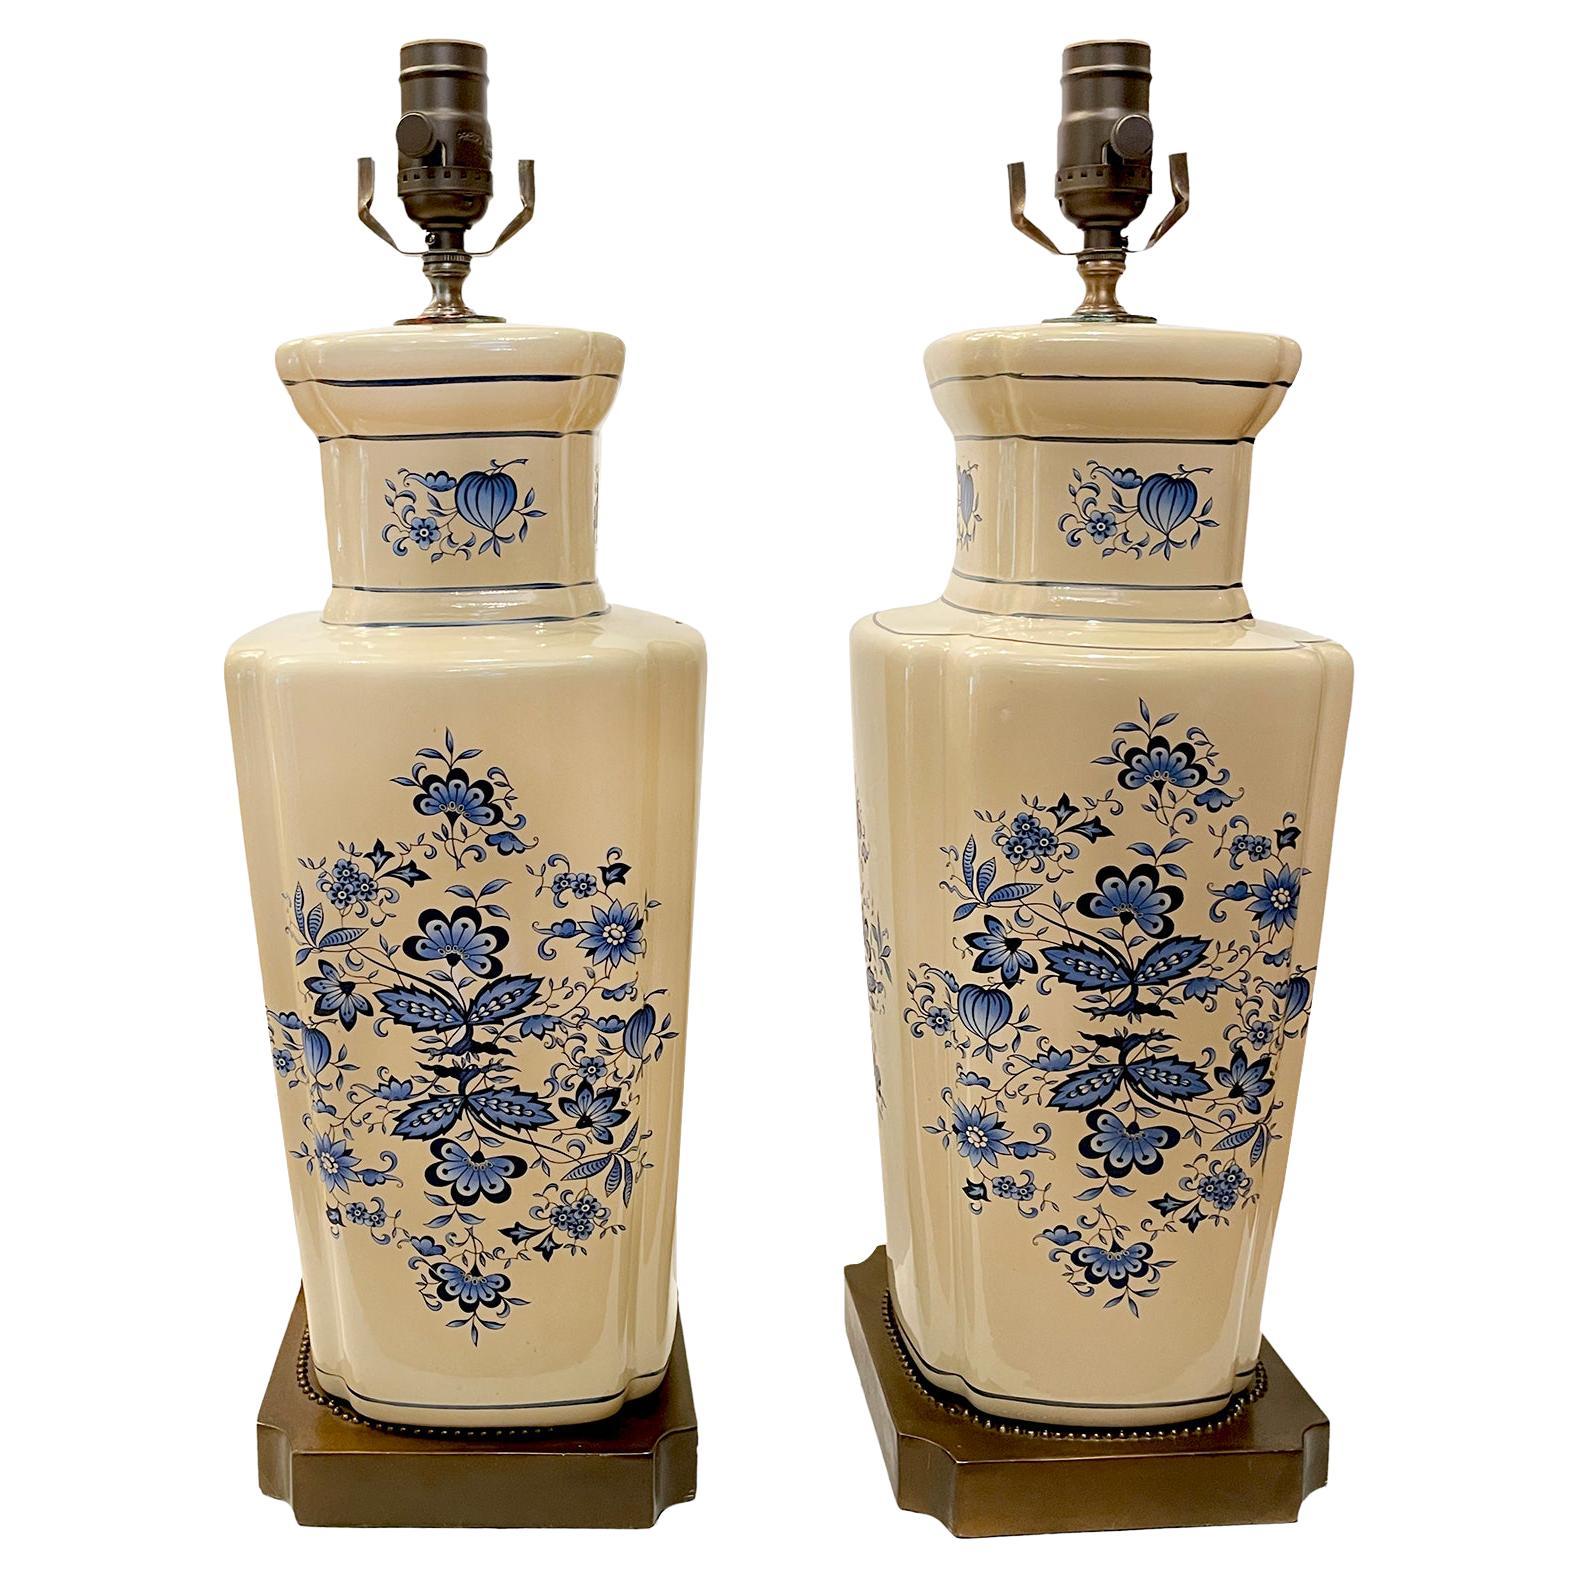 Pair of White and Blue Porcelain Lamps